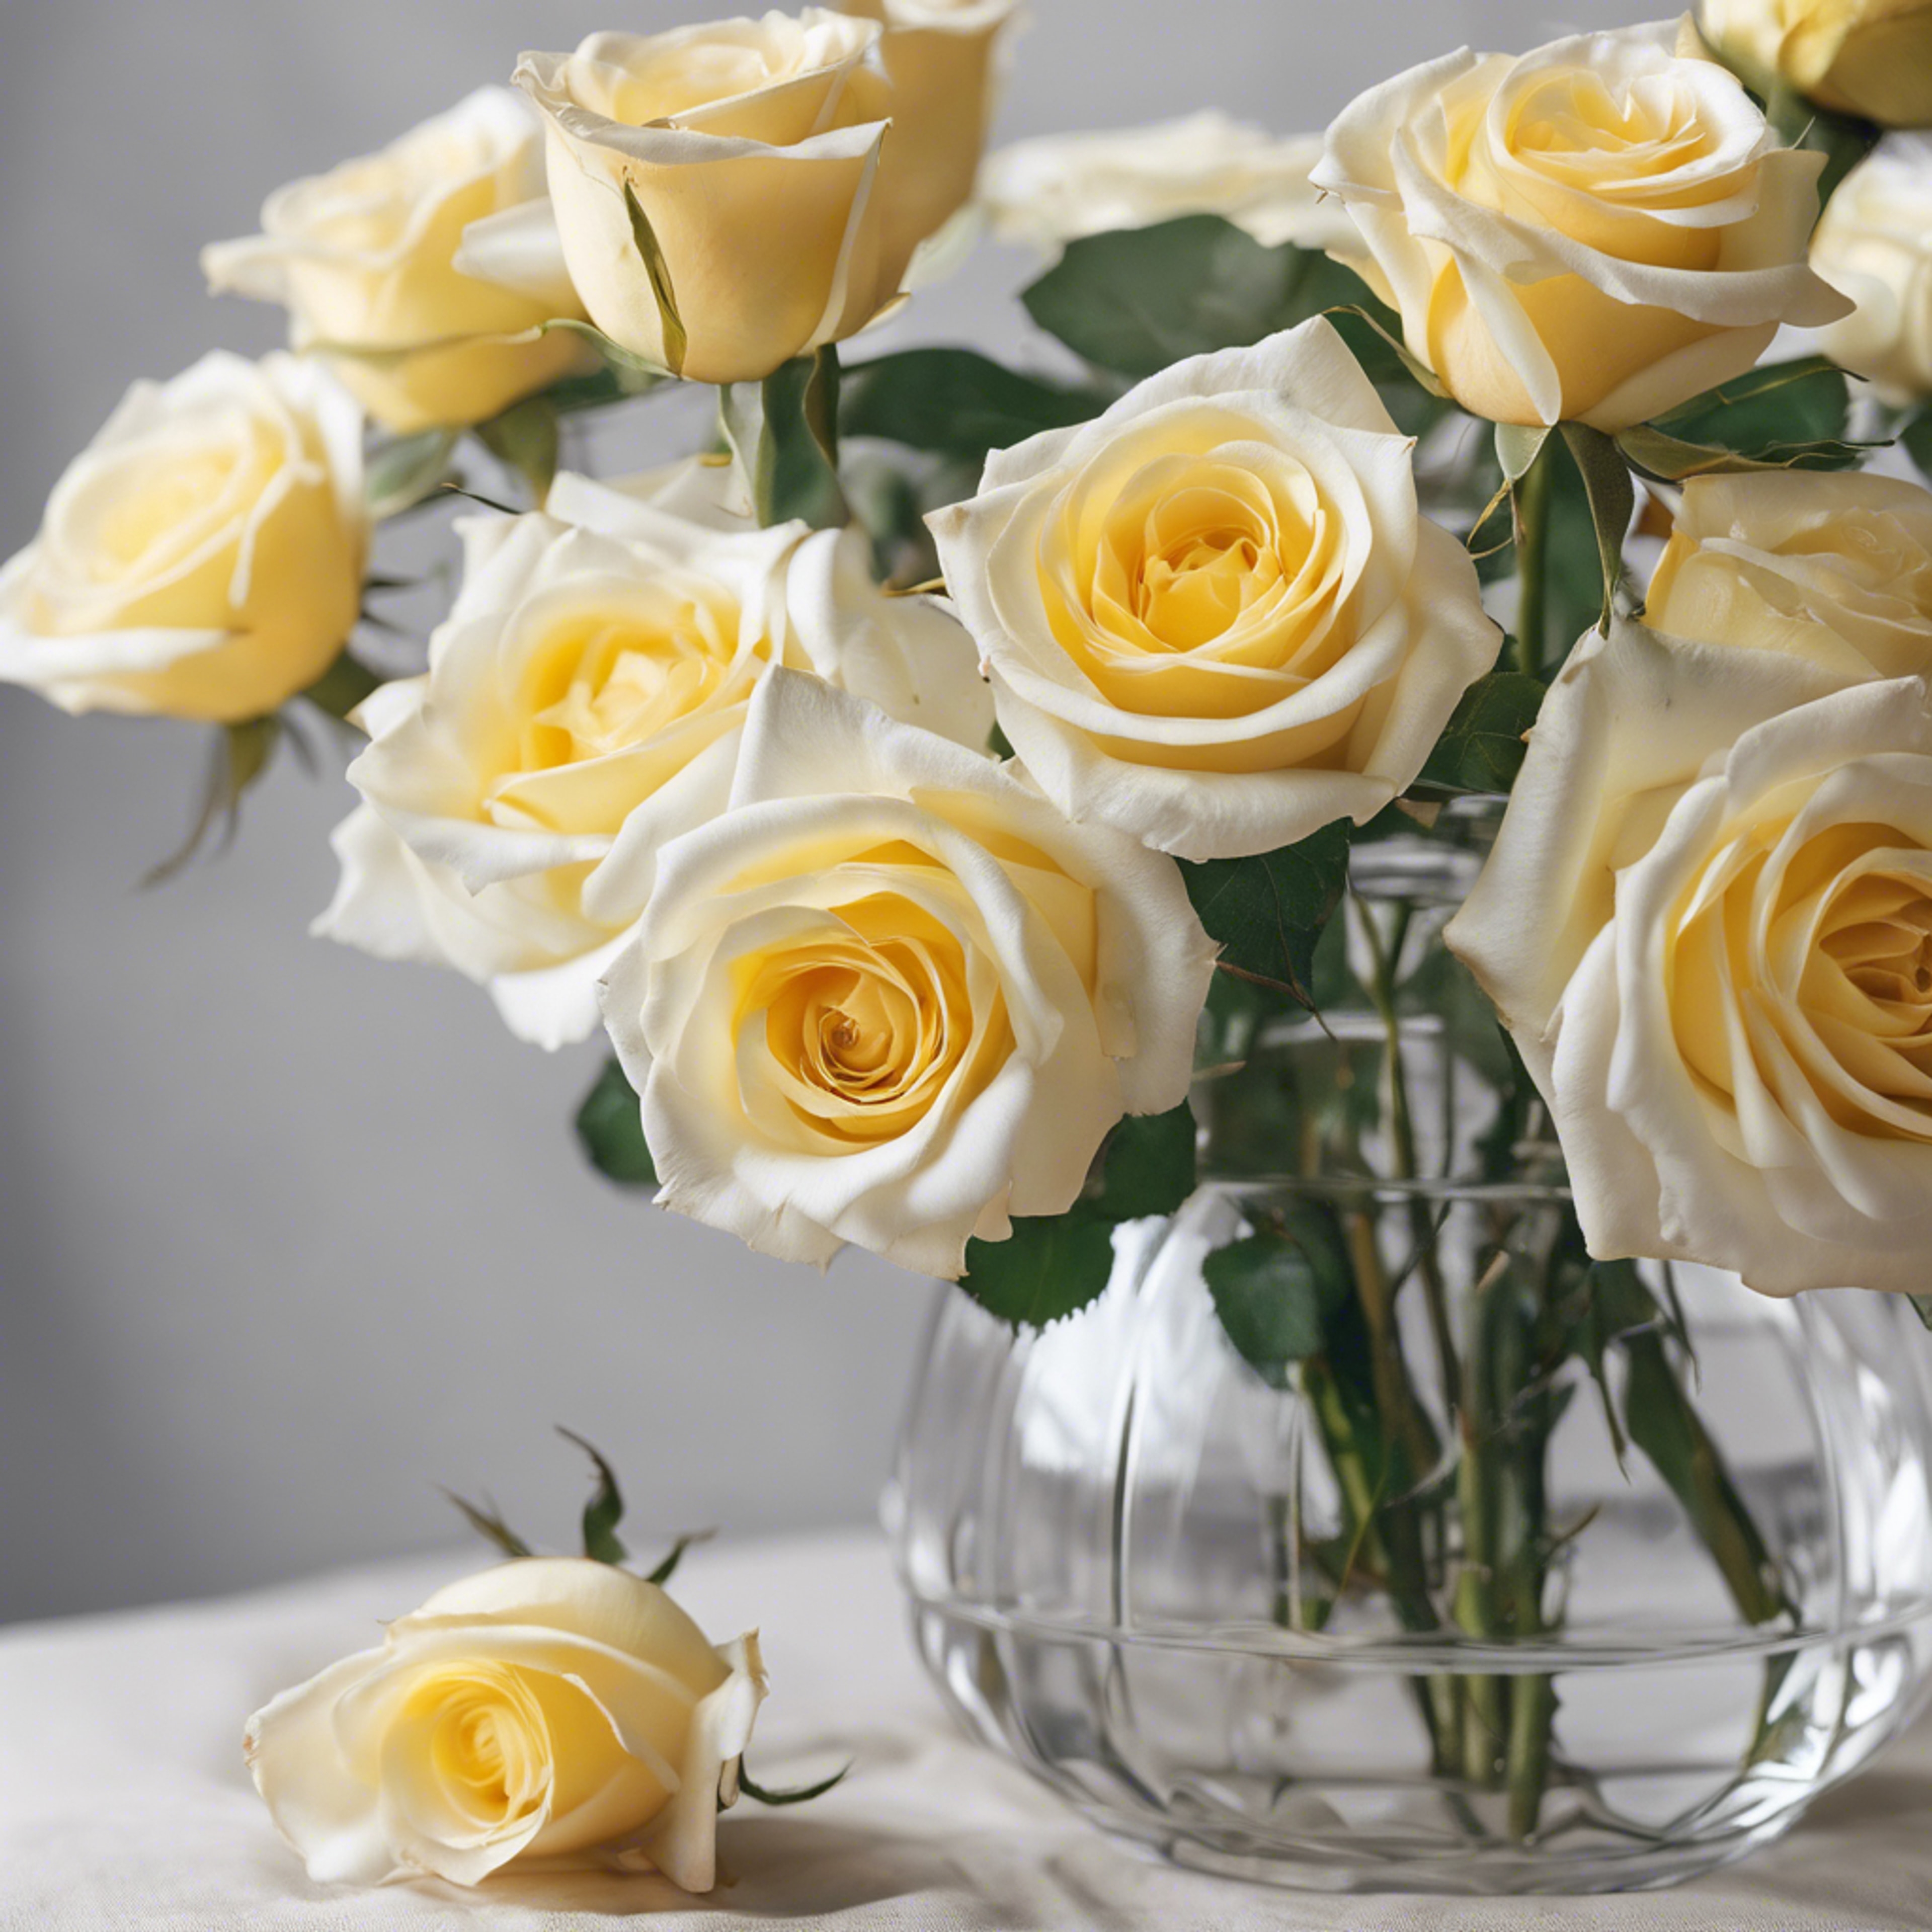 A beautiful array of luminescent white and yellow roses in a crystal clear vase. Hintergrund[29c0e485a0b1412795b9]